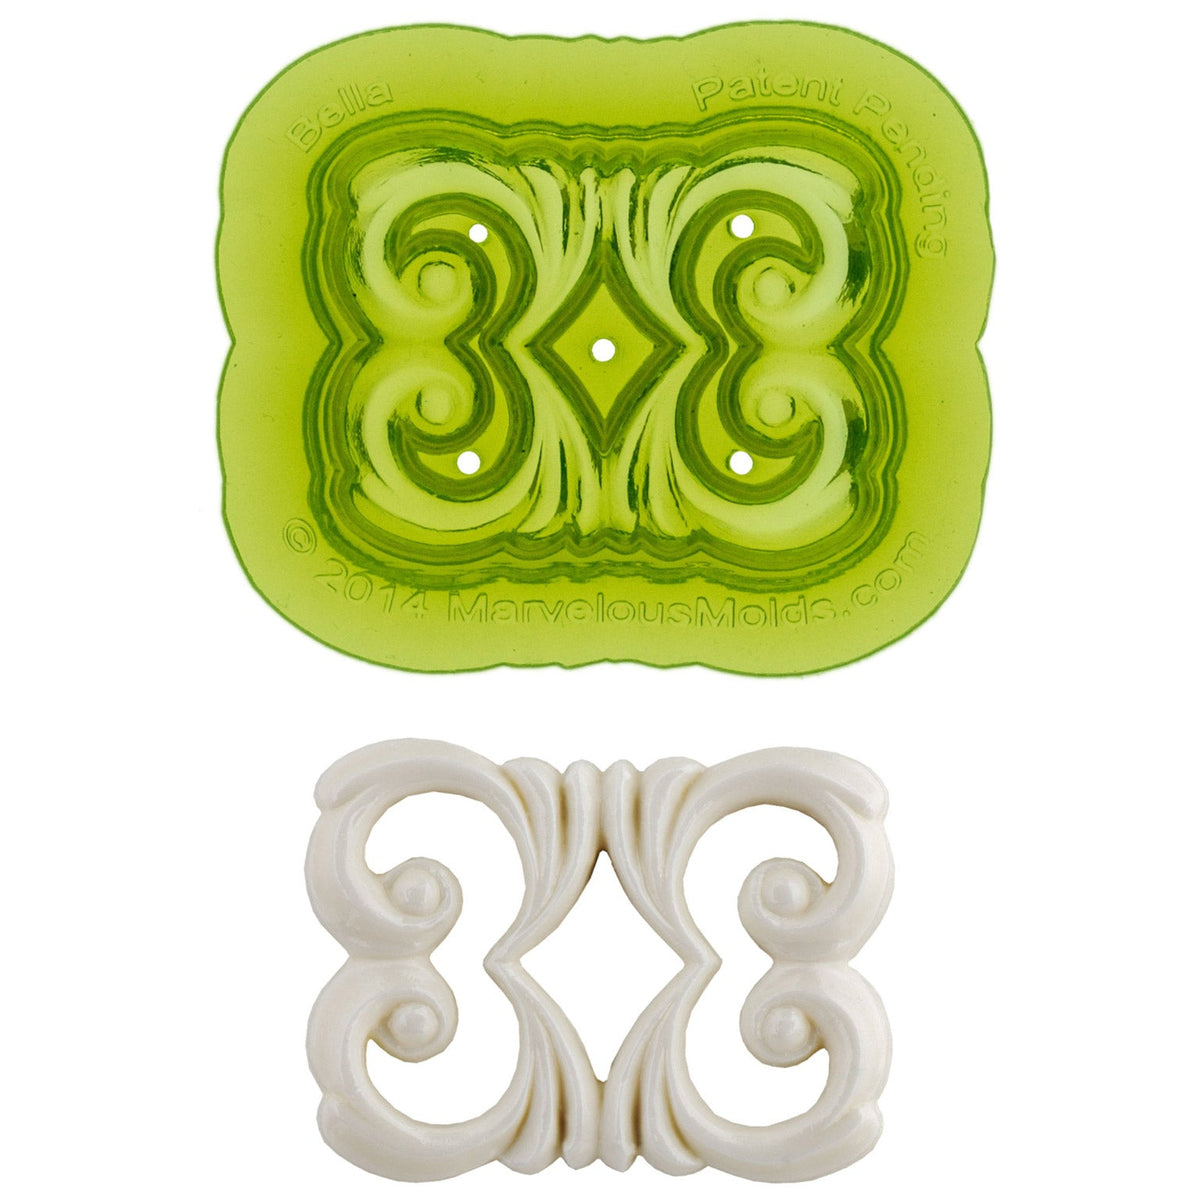 Bella Scroll Food Safe Silicone Mold for Fondant Cake Decorating by Marvelous Molds